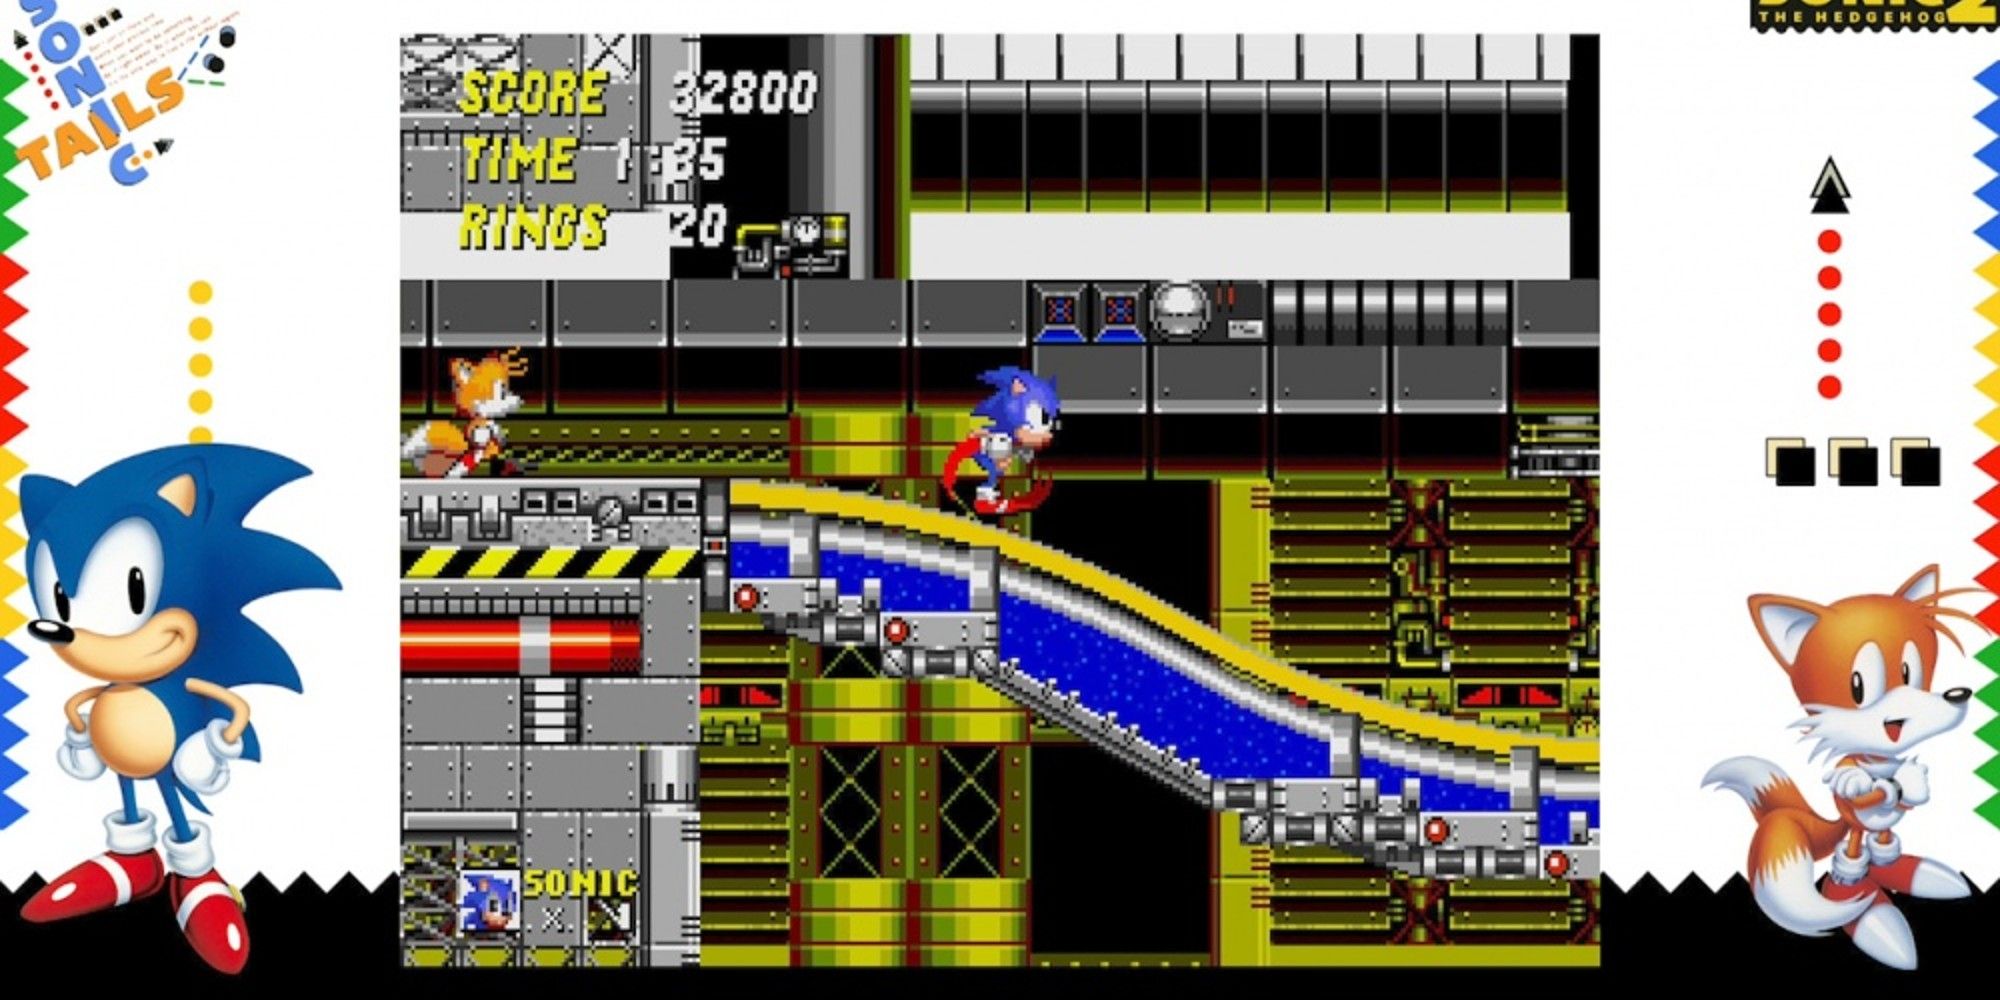 Sonic and Tails running in the Chemical Plant Zone in Sonic the Hedgehog 2